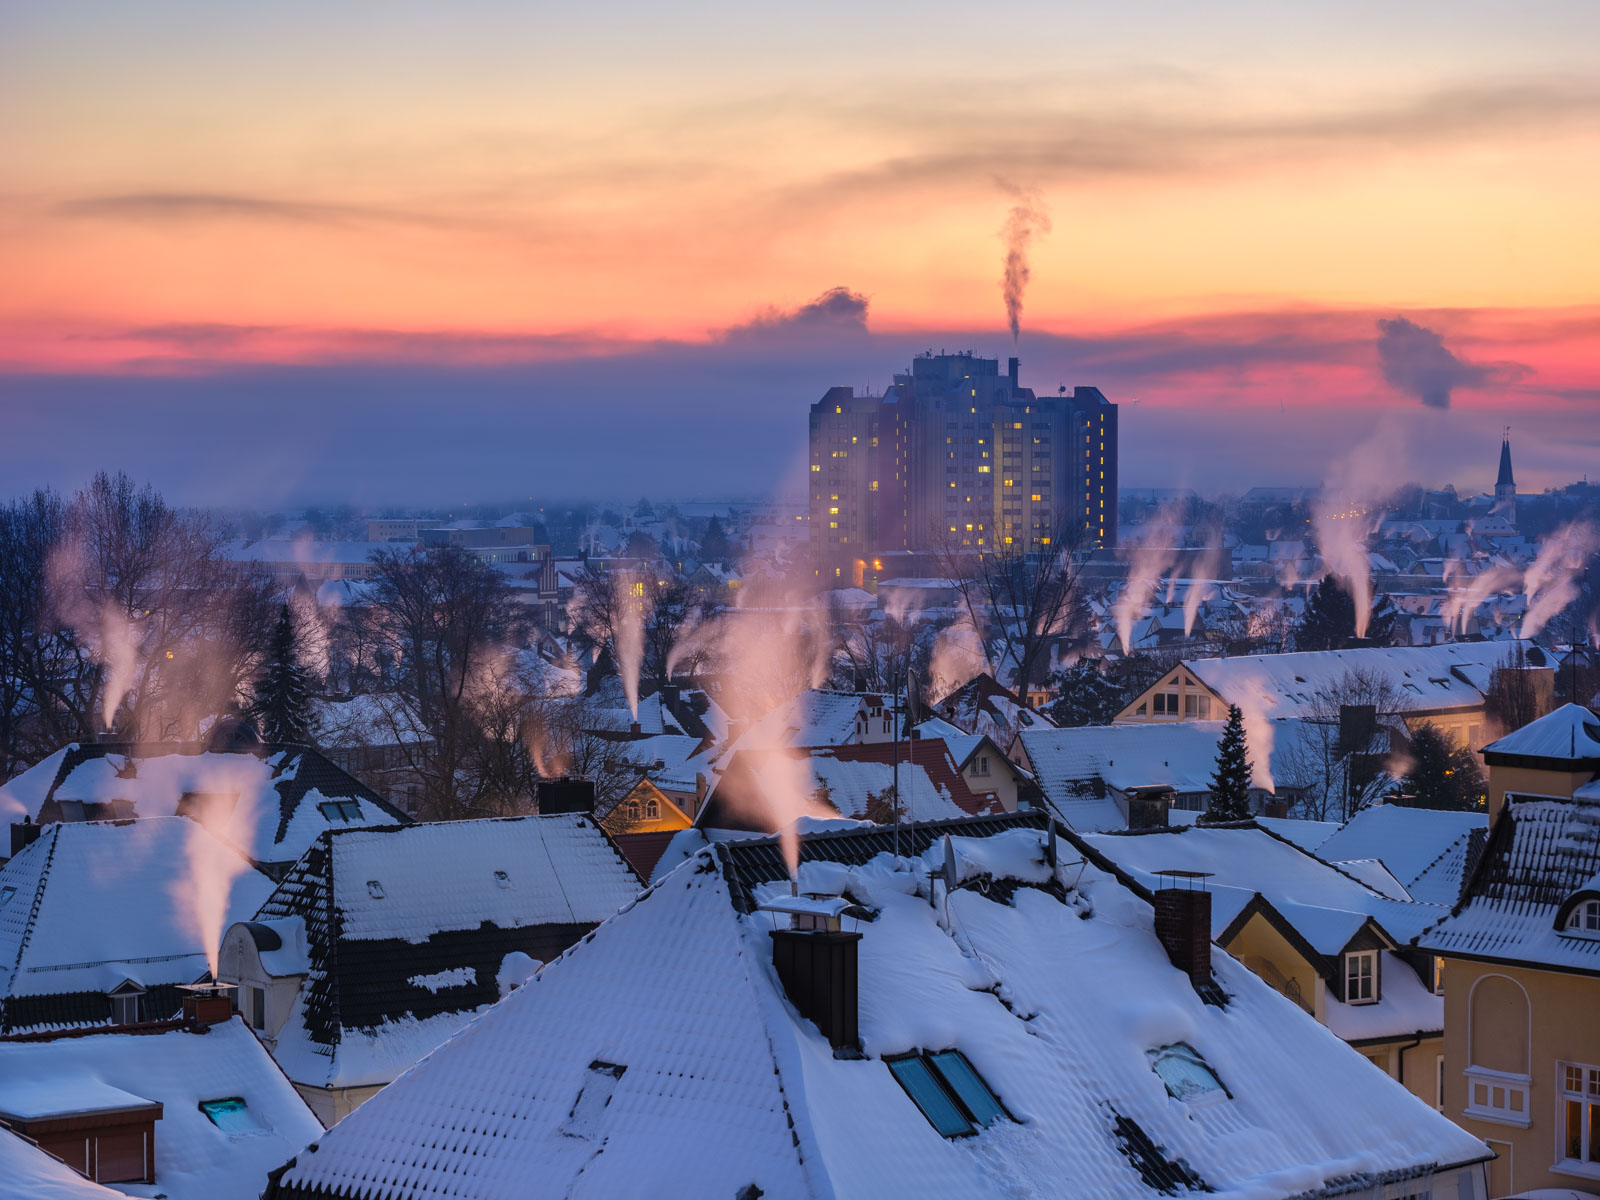 Early in the morning above the rooftops of Bielefeld on 13 February 2021 (Germany).